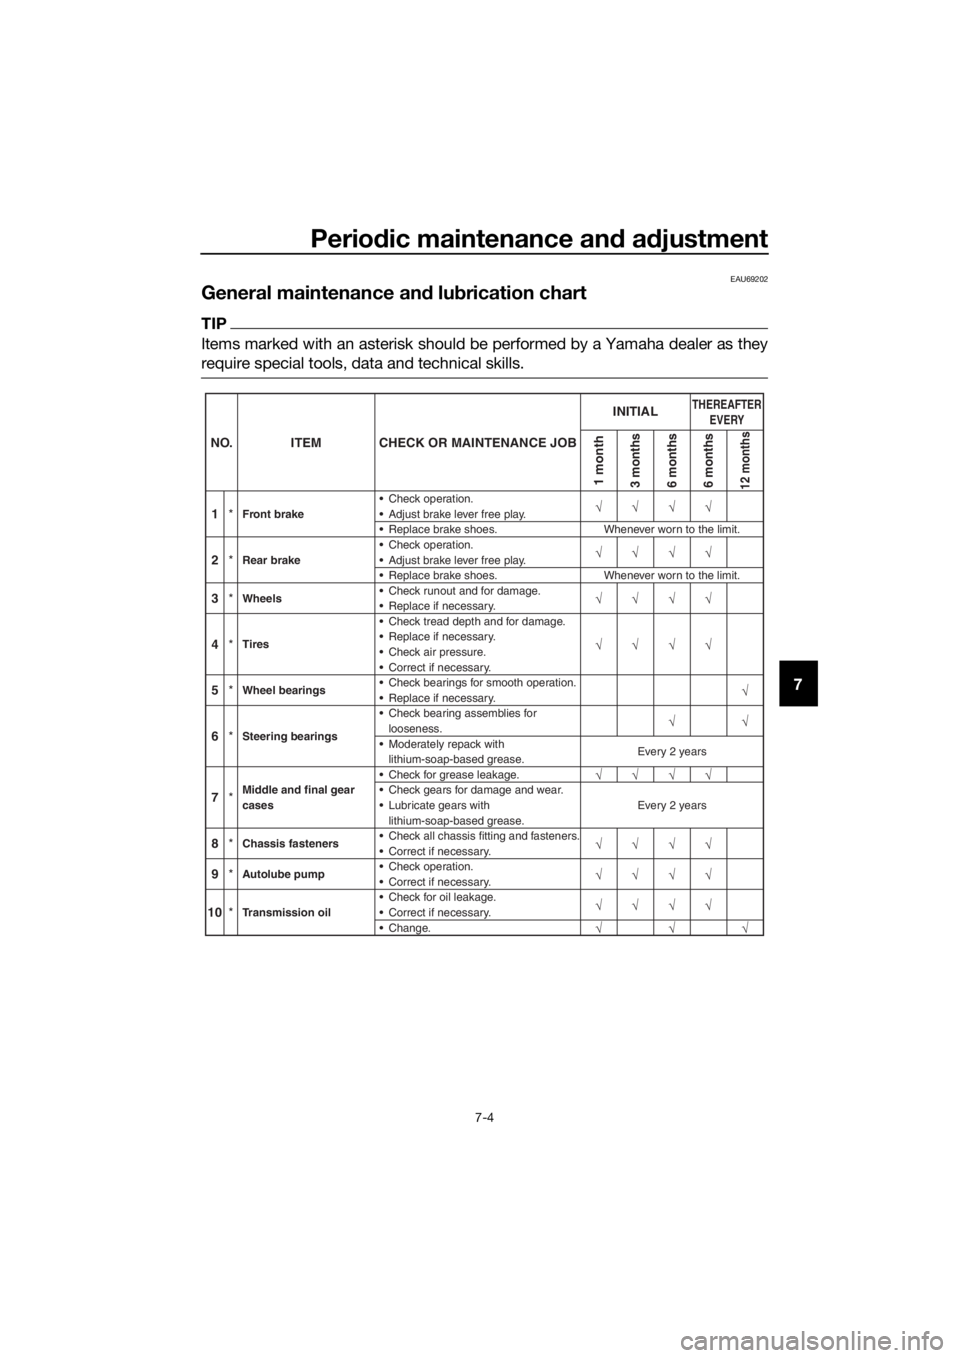 YAMAHA PW50 2022  Owners Manual Periodic maintenance an d a djustment
7-4
7
EAU69202
General maintenance an d lu brication chart
TIP
Items marked with an asterisk should be performed by a Yamaha dealer as they
require special tools,